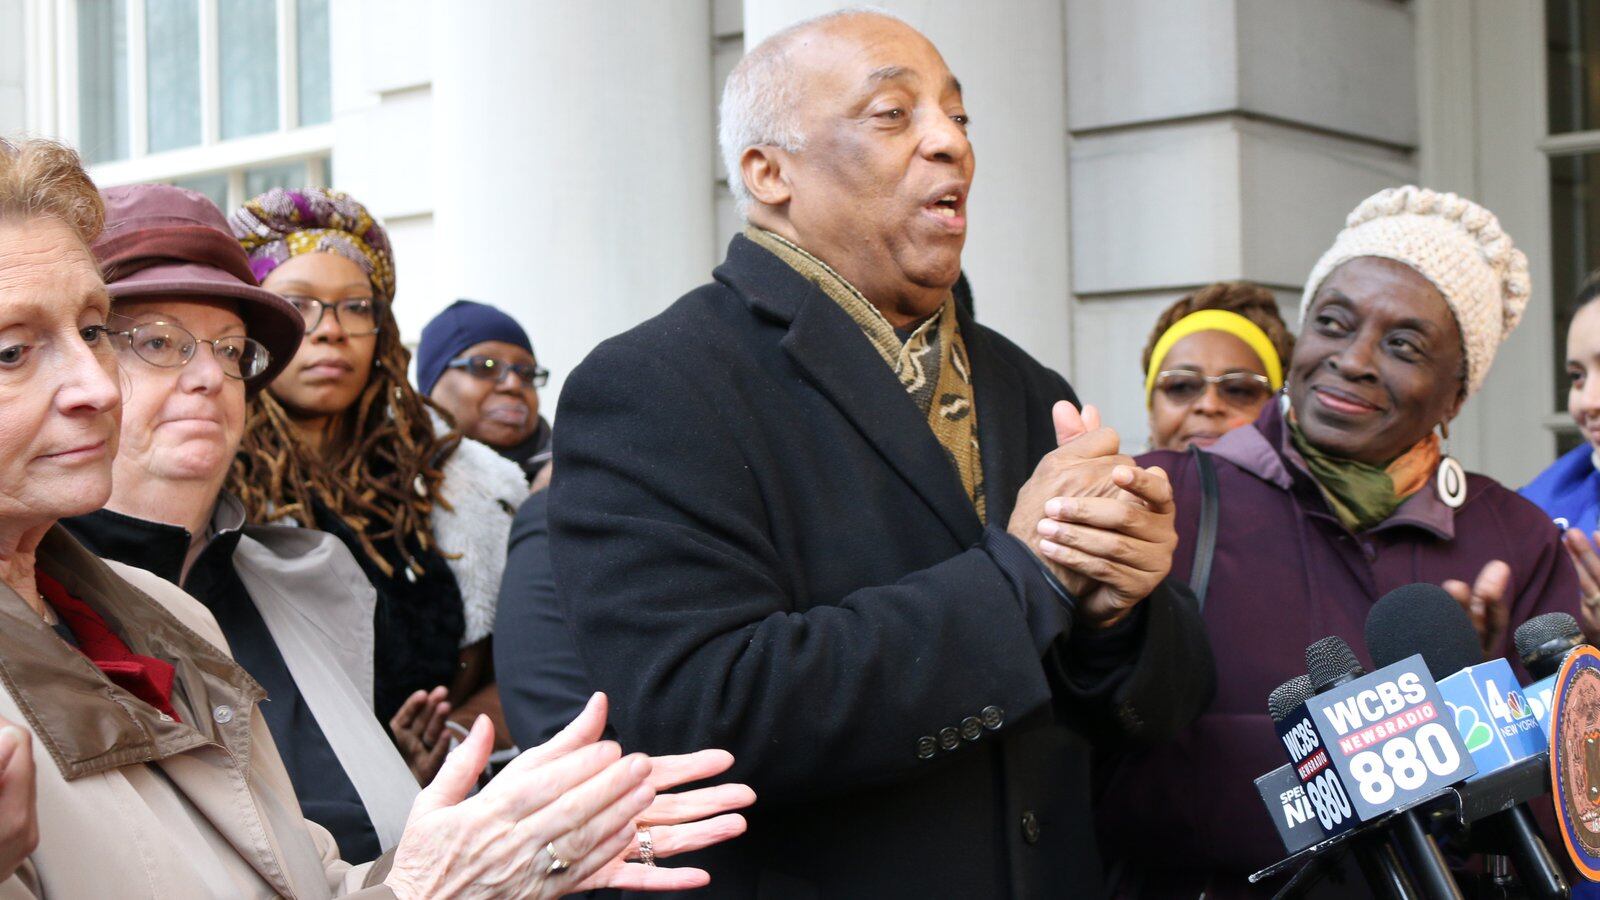 On the steps of City Hall, Assemblyman Charles Barron rallied for support to scrap the Specialized High School Admissions Test earlier this year.